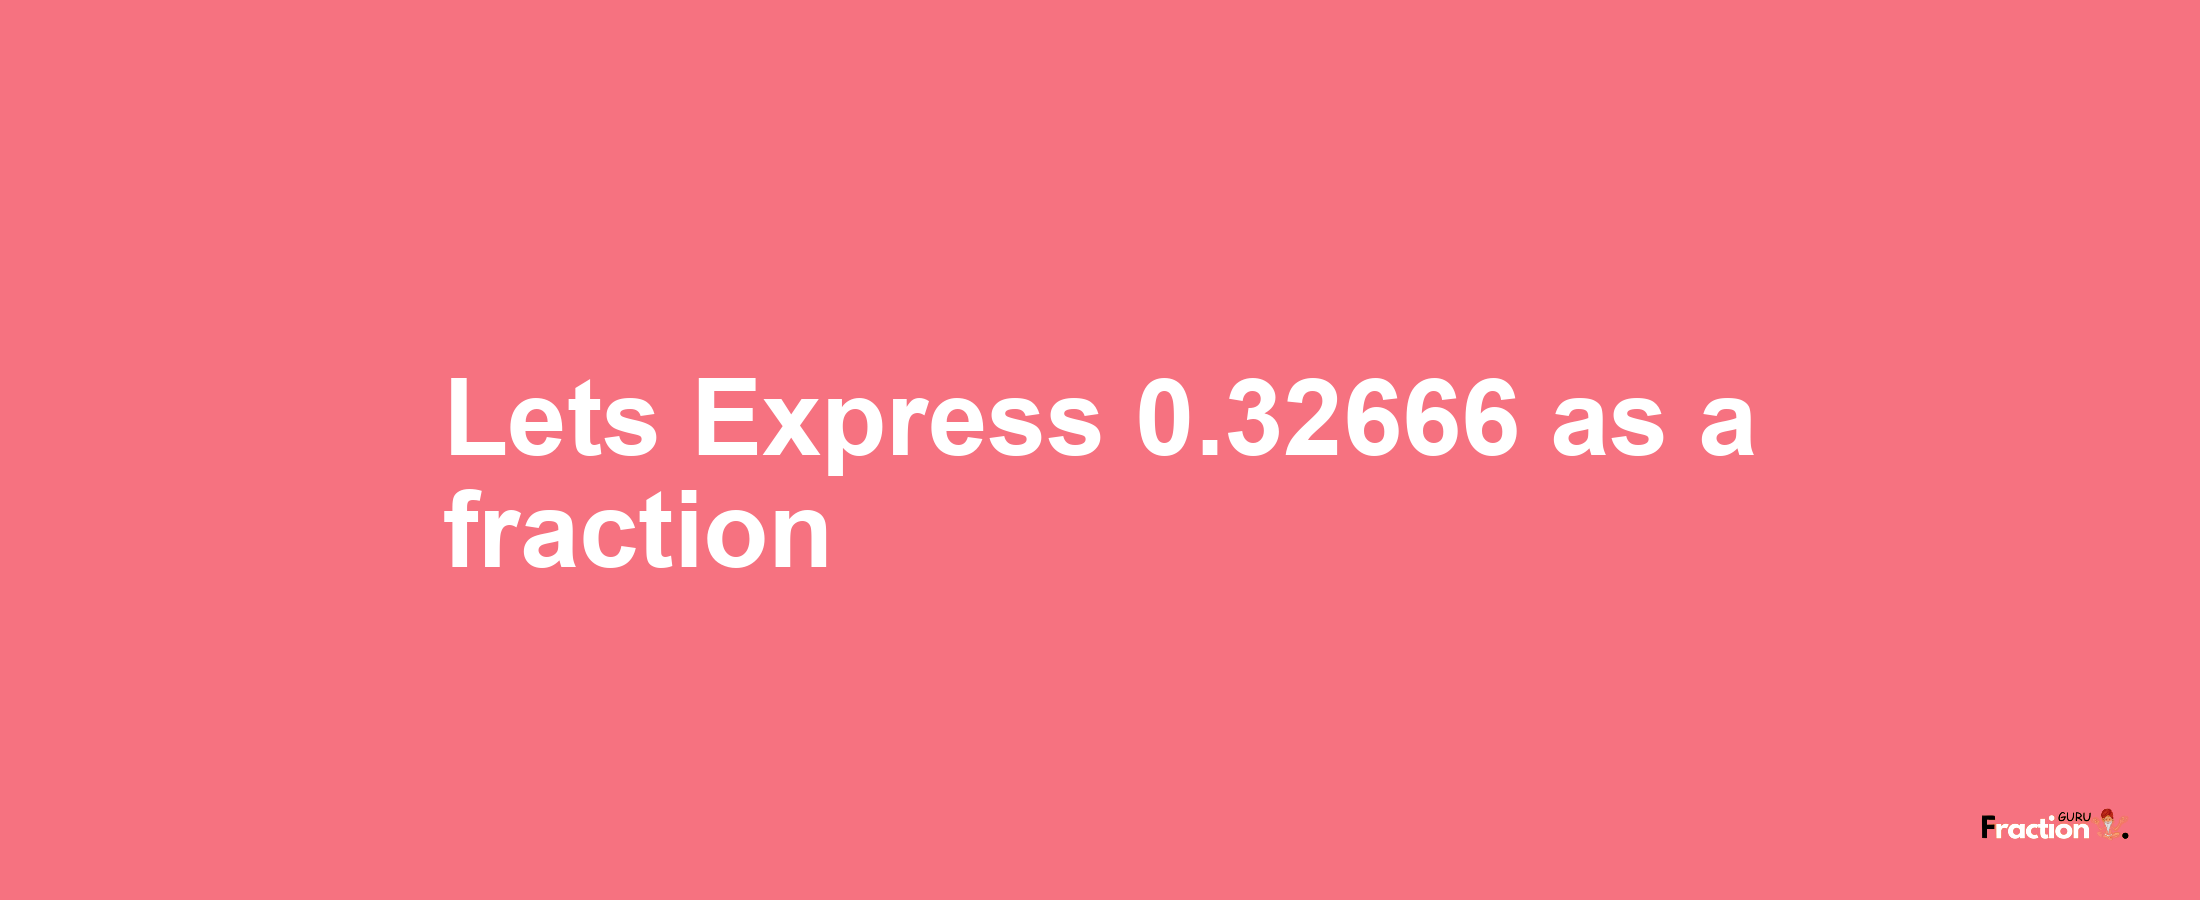 Lets Express 0.32666 as afraction